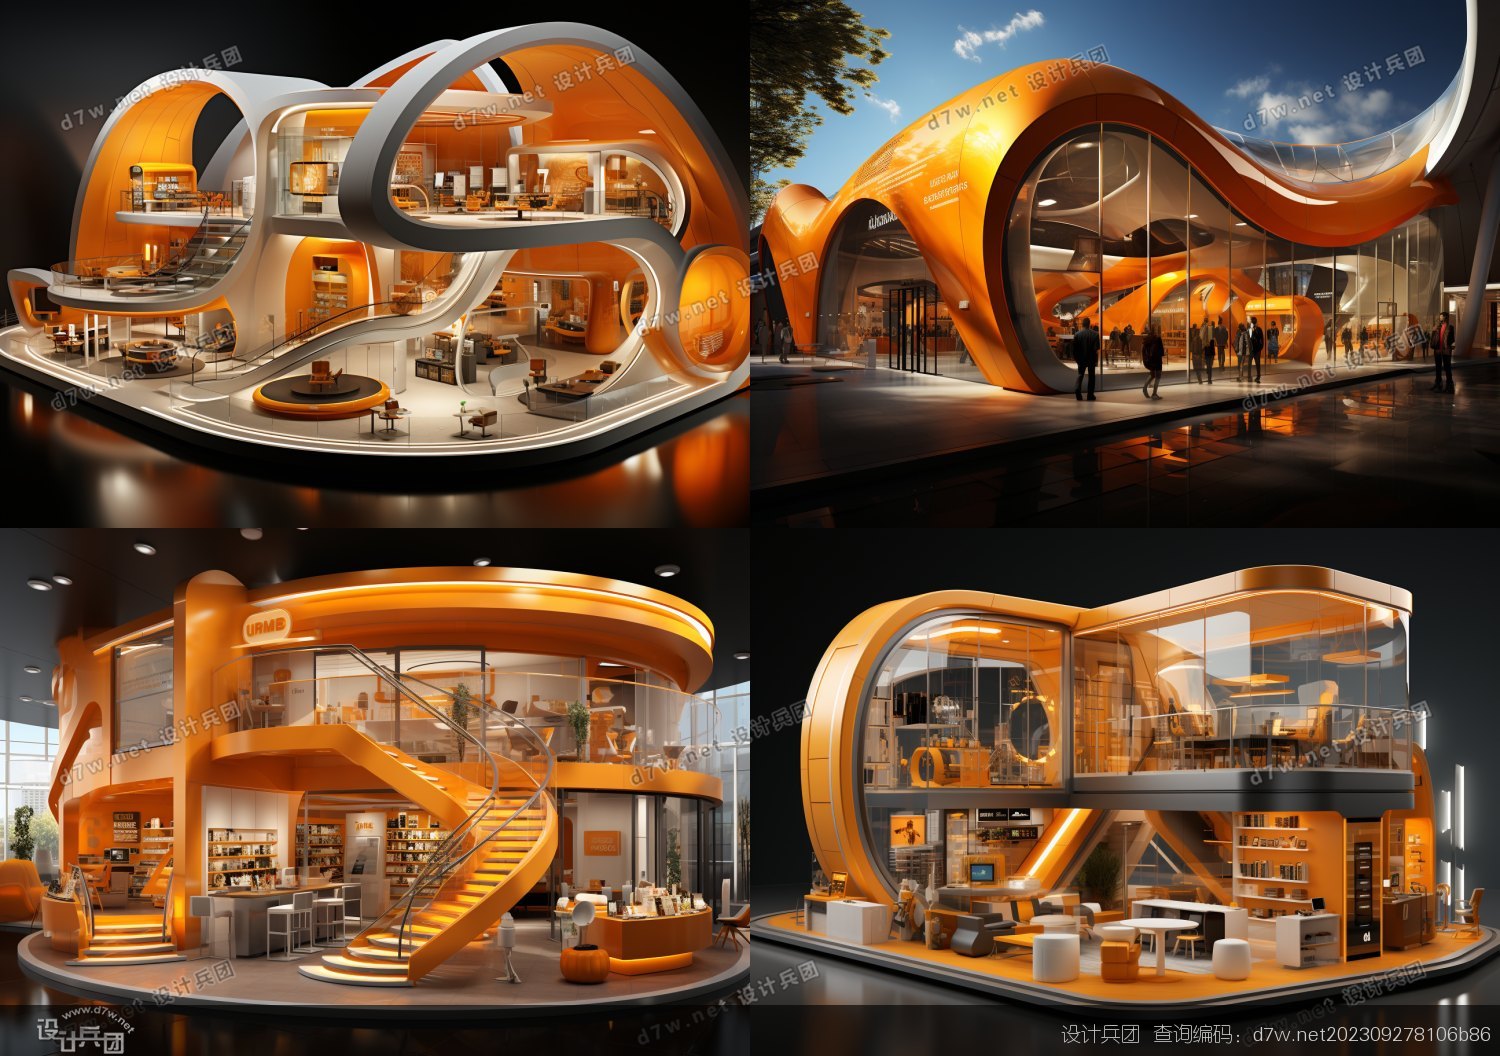 su_yan_a_3d_rendering_of_the_building_with_an_orange_building_a_8680b1b1-2cd1-4f5d-95af-3370ef4a0d9b.png